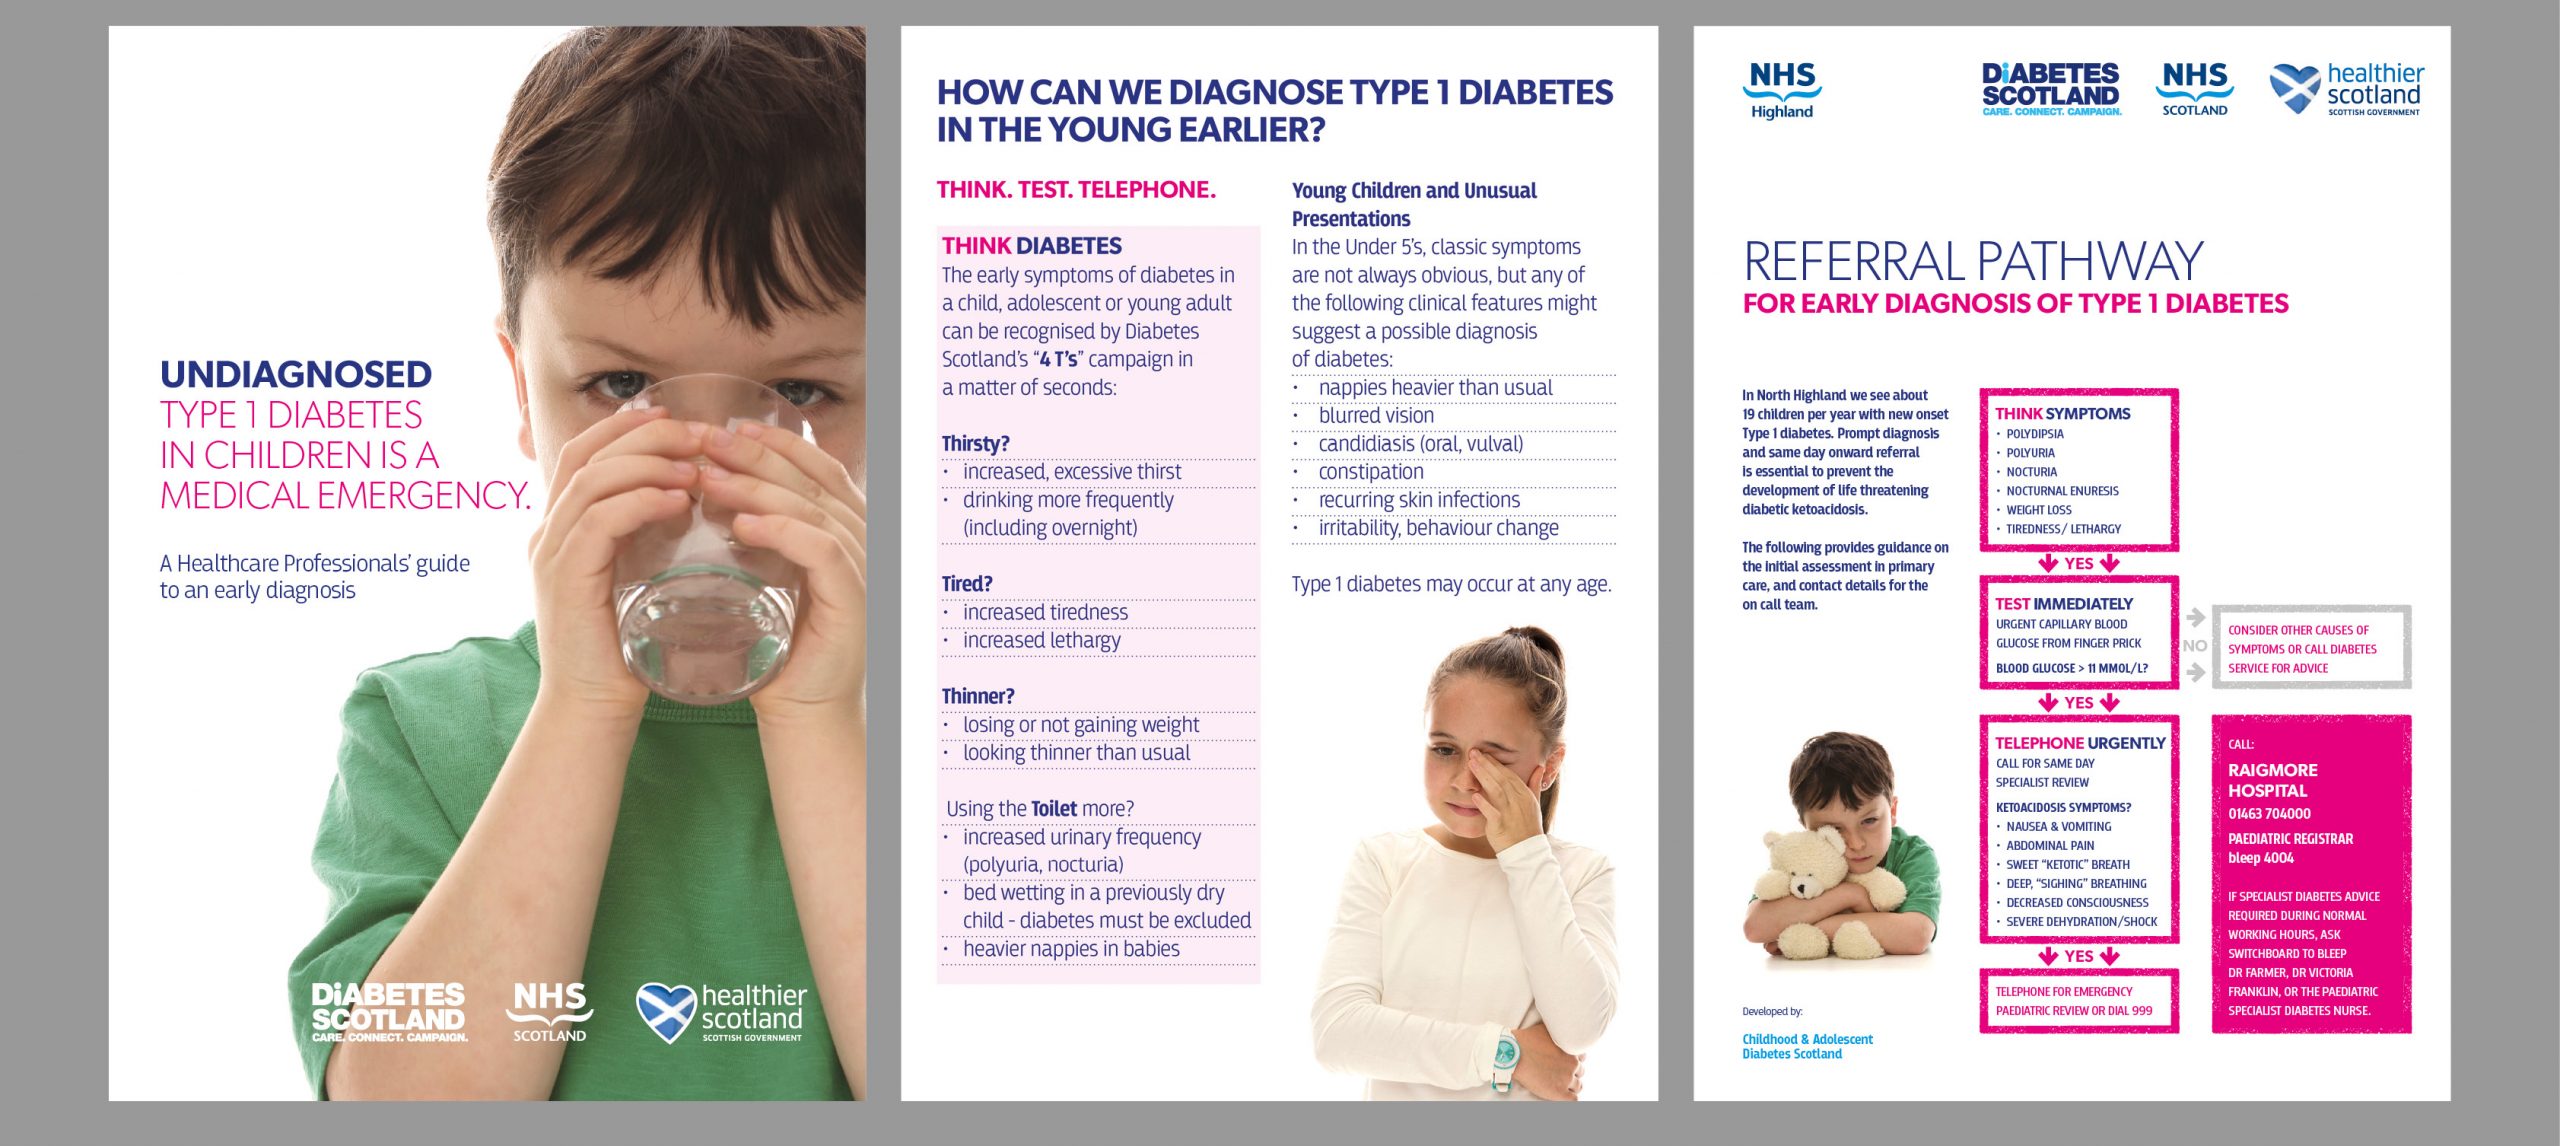 Literature from NHS Scotland's Diabetic ketoacidosis awareness campaign displaying information on how to diagnose children before it becomes an emergency situation.